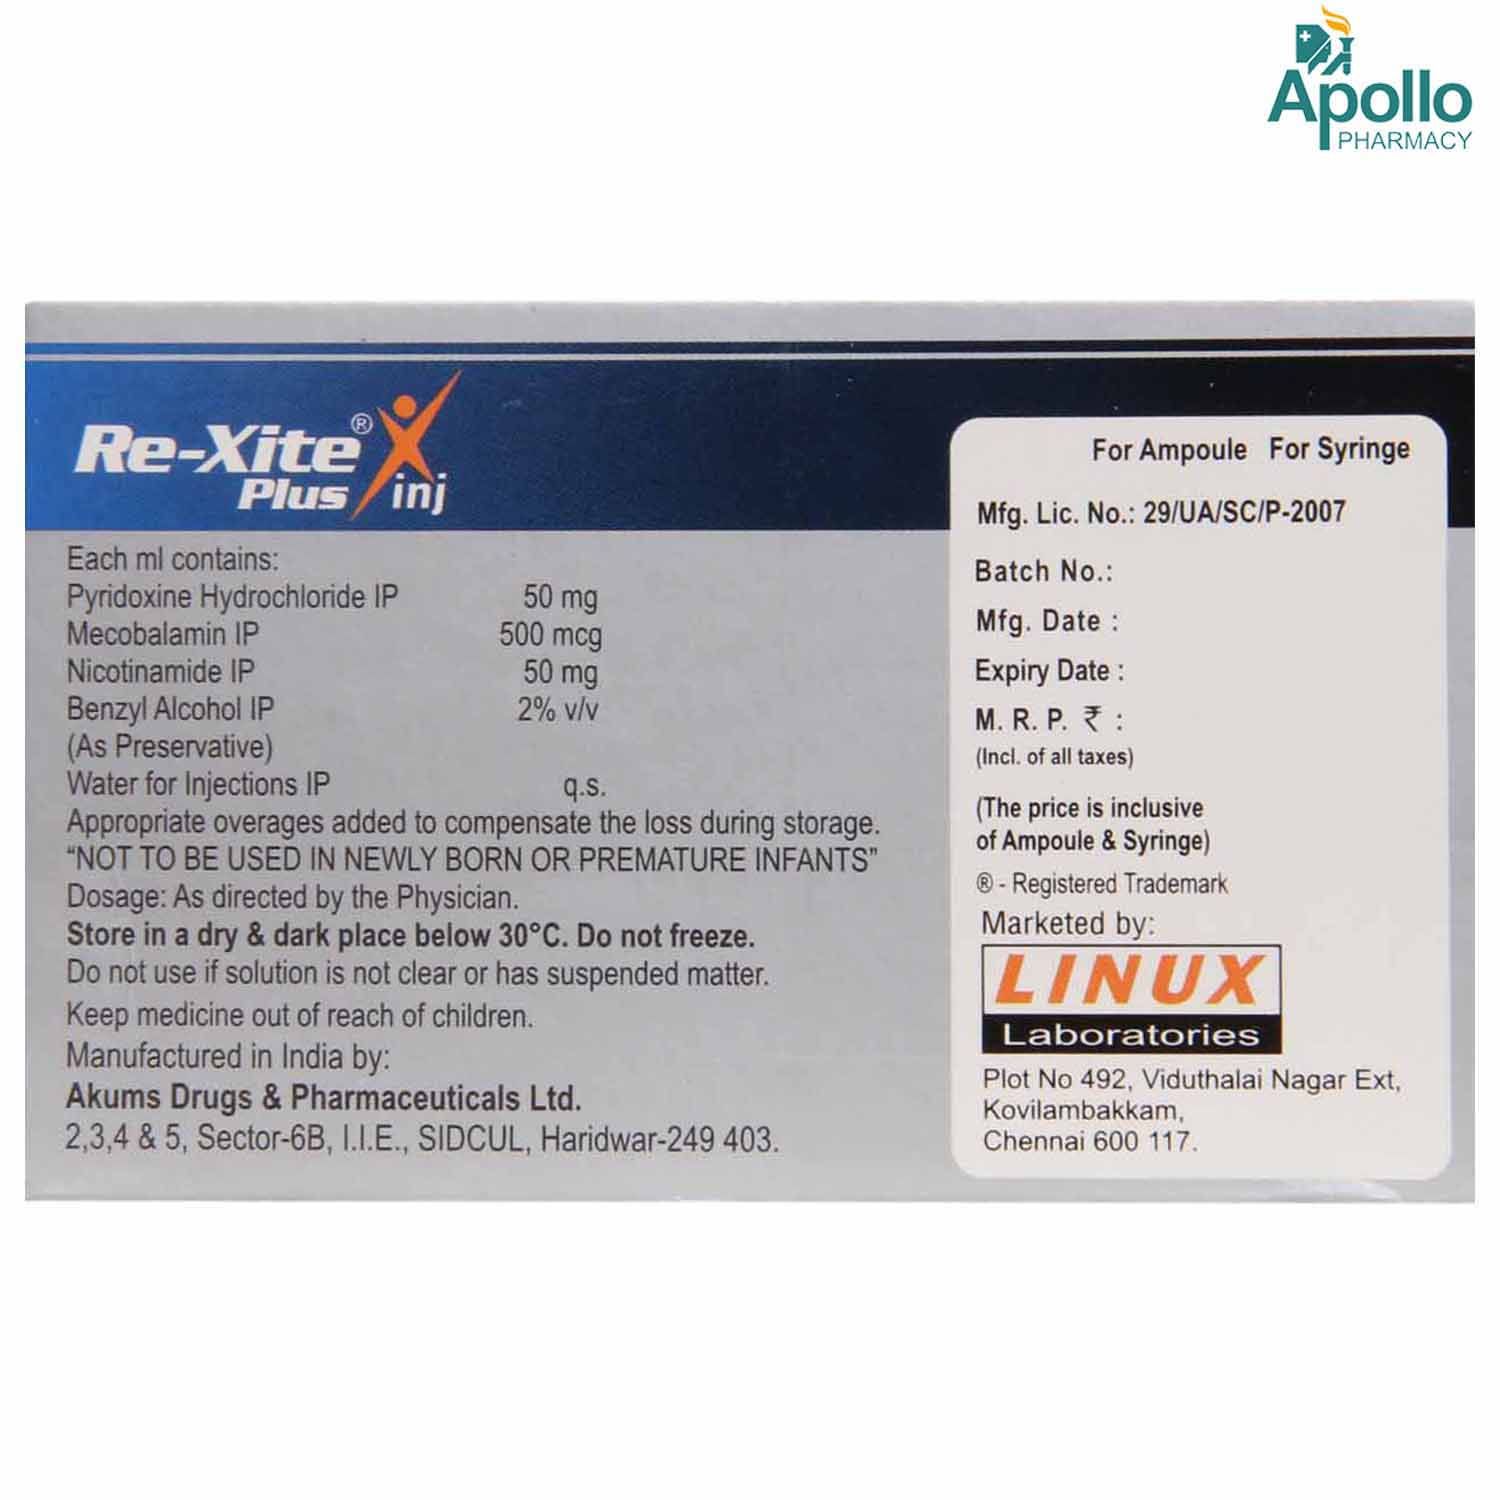 Rexite Plus Injection 2 ml, Pack of 1 INJECTION